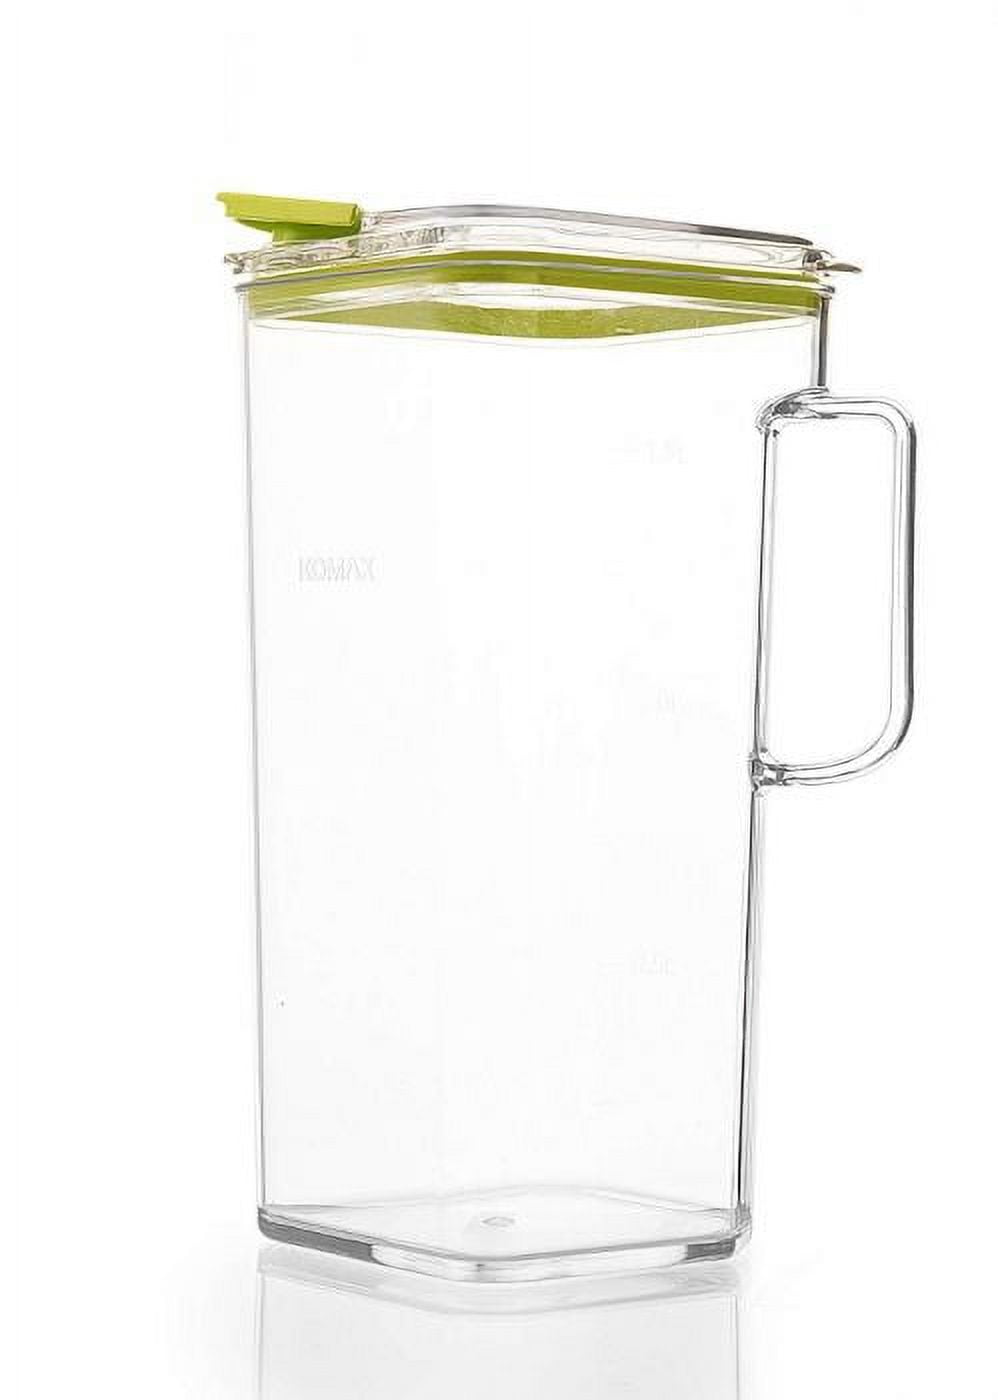 Compact Pitcher, Plastic Pitcher with Lid